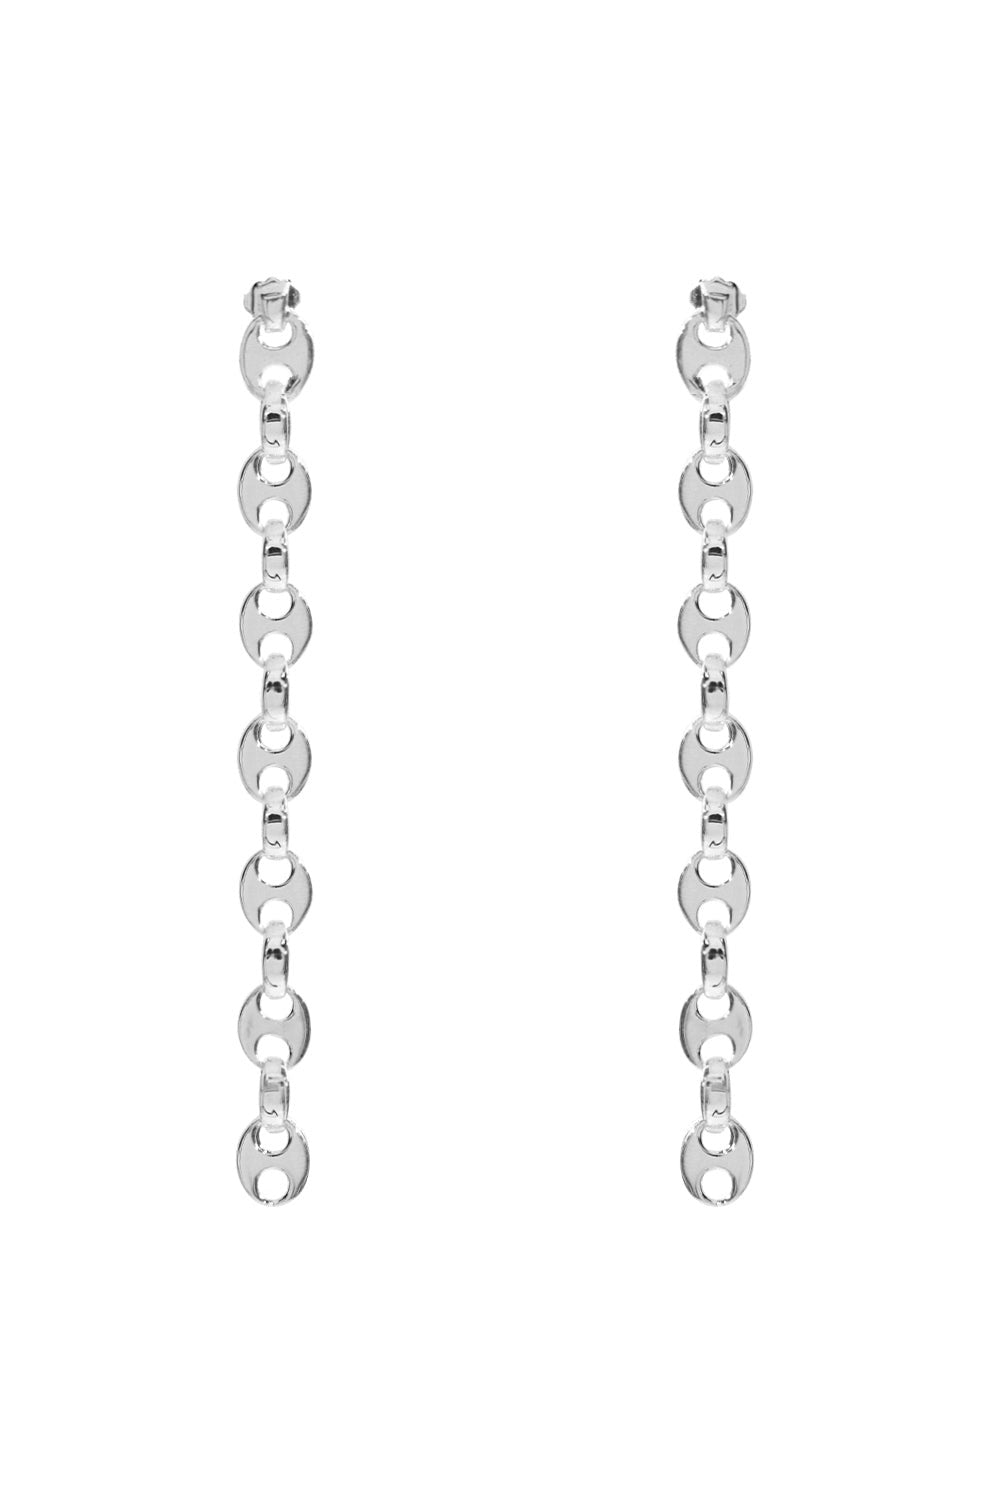 PACO RABANNE ACCESSORIES SILVER EIGHT LINK NANO DROP EARRING | SILVER